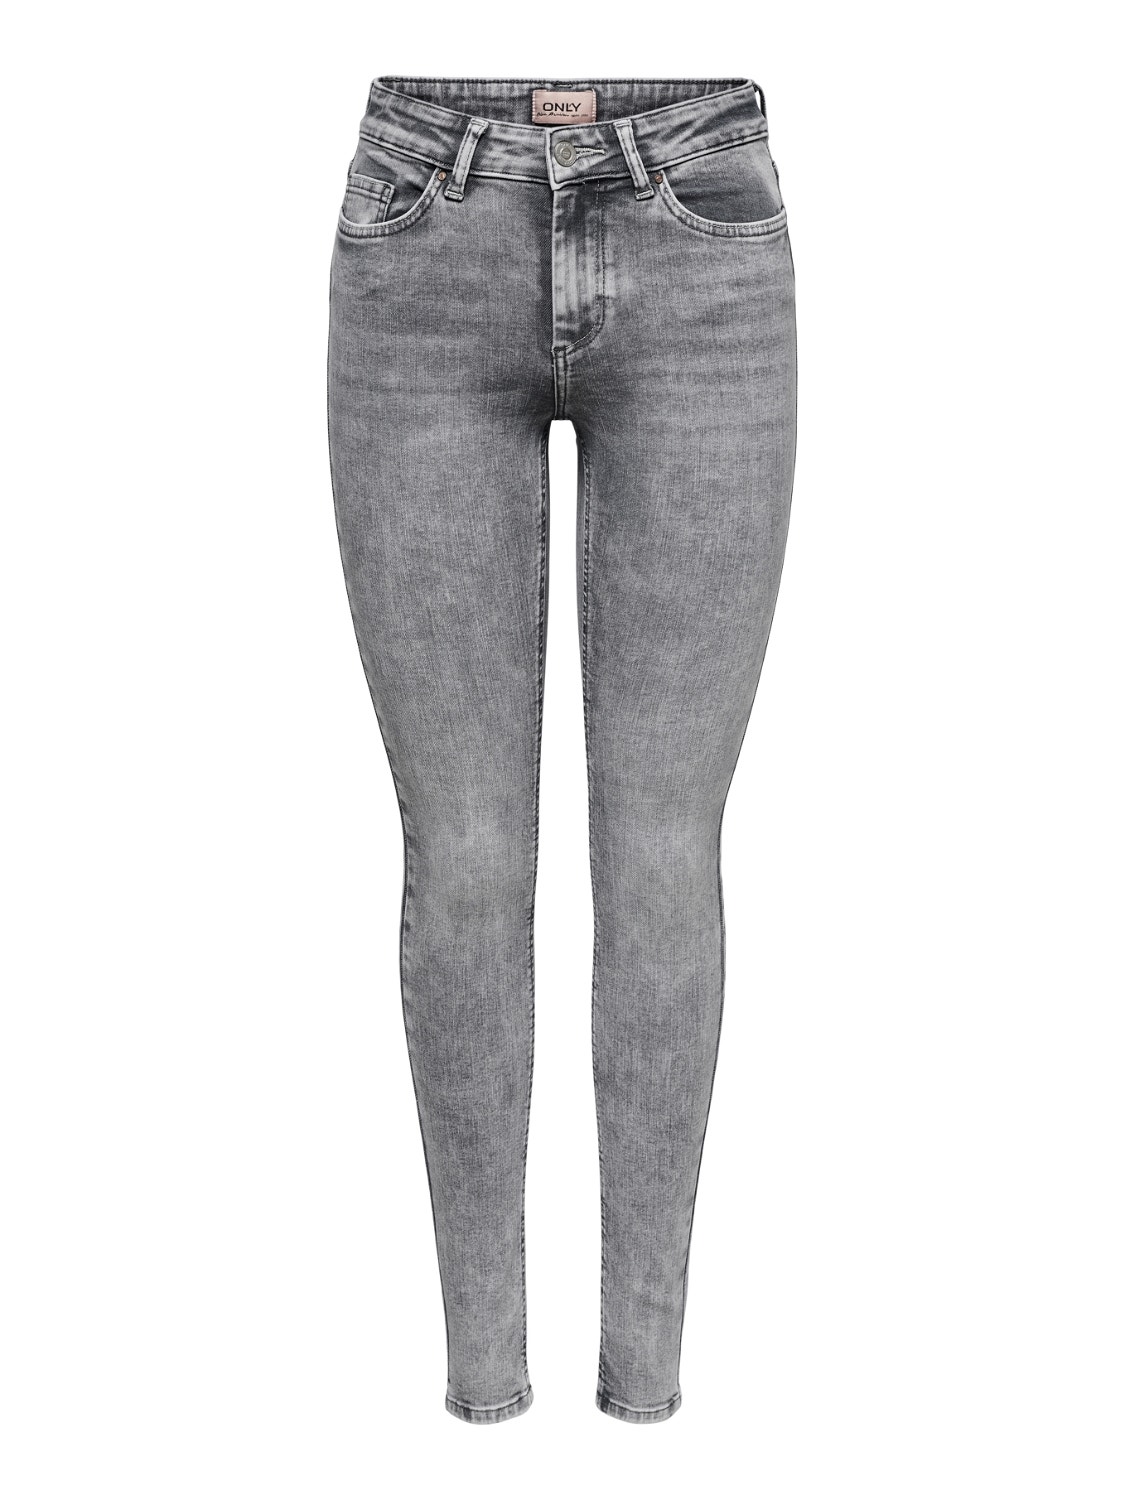 SKINNY FIT JEANS - Mid-grey